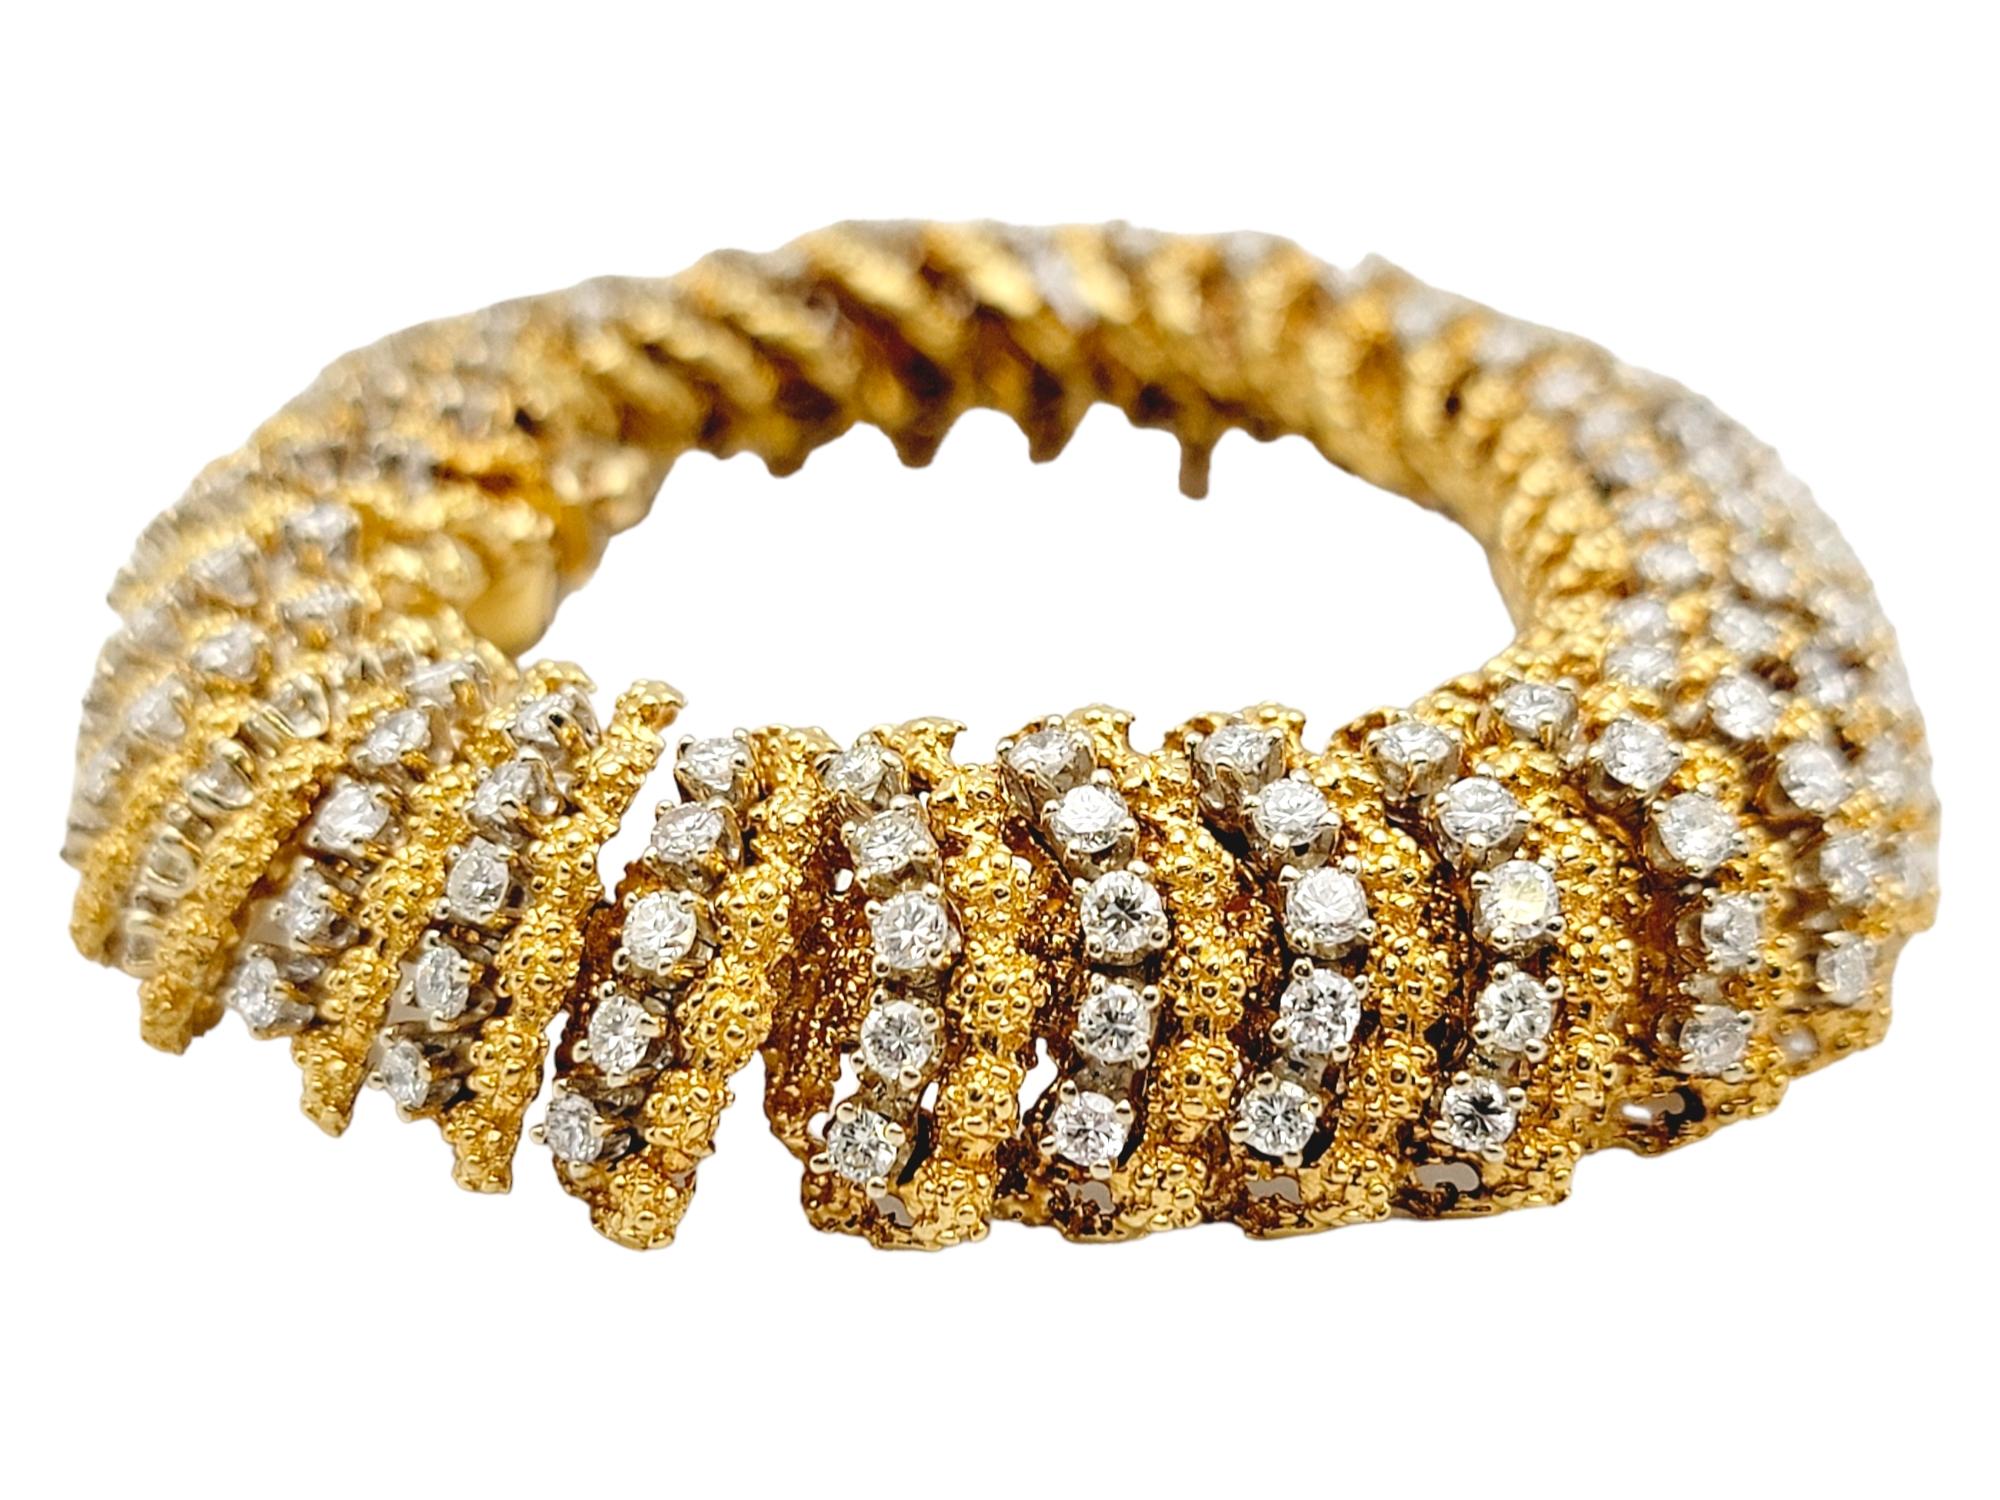 You will absolutely fall in love with this stunningly beautiful bracelet designed by renowned jeweler, Hammerman Brothers. Since 1946, Hammerman Jewels has been an American made, family owned business famous for their Old world craftsmanship, ever